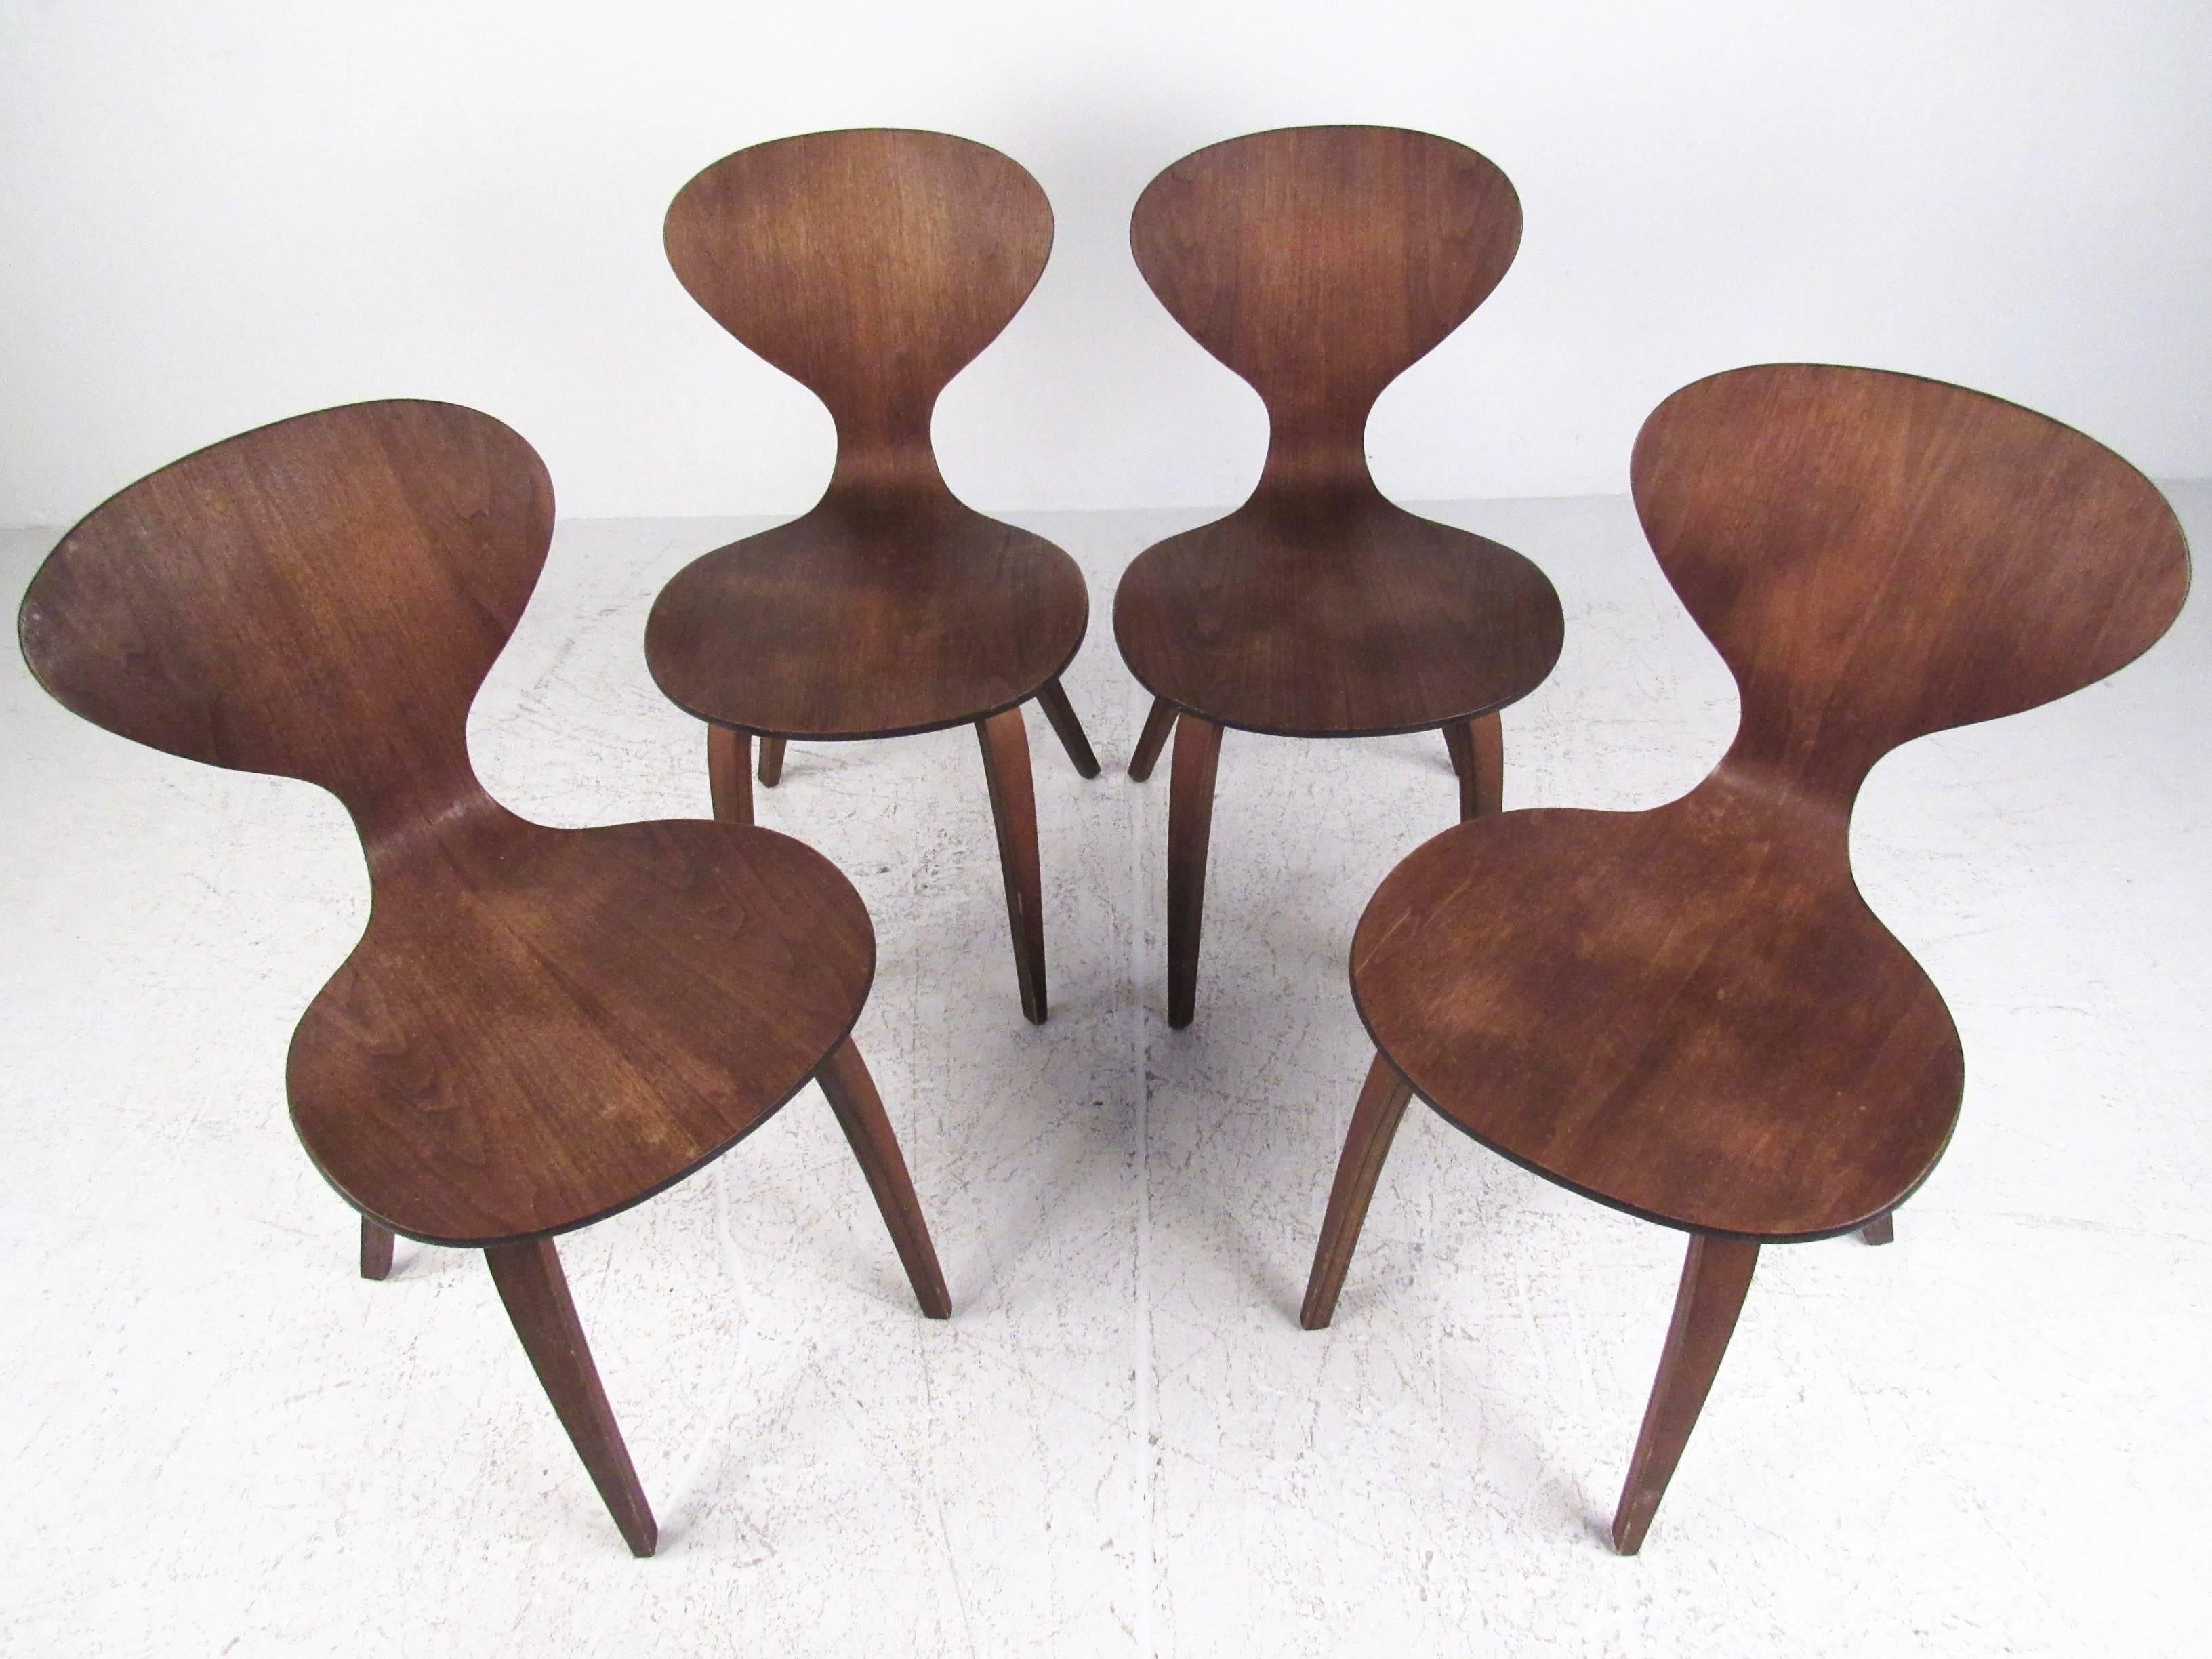 This set of four bentwood dining chairs feature sculptural Norman Cherner style construction with stylish seat backs and comfortable construction. The set of Mid-Century Modern chairs make a beautiful addition to any interior. Please confirm item